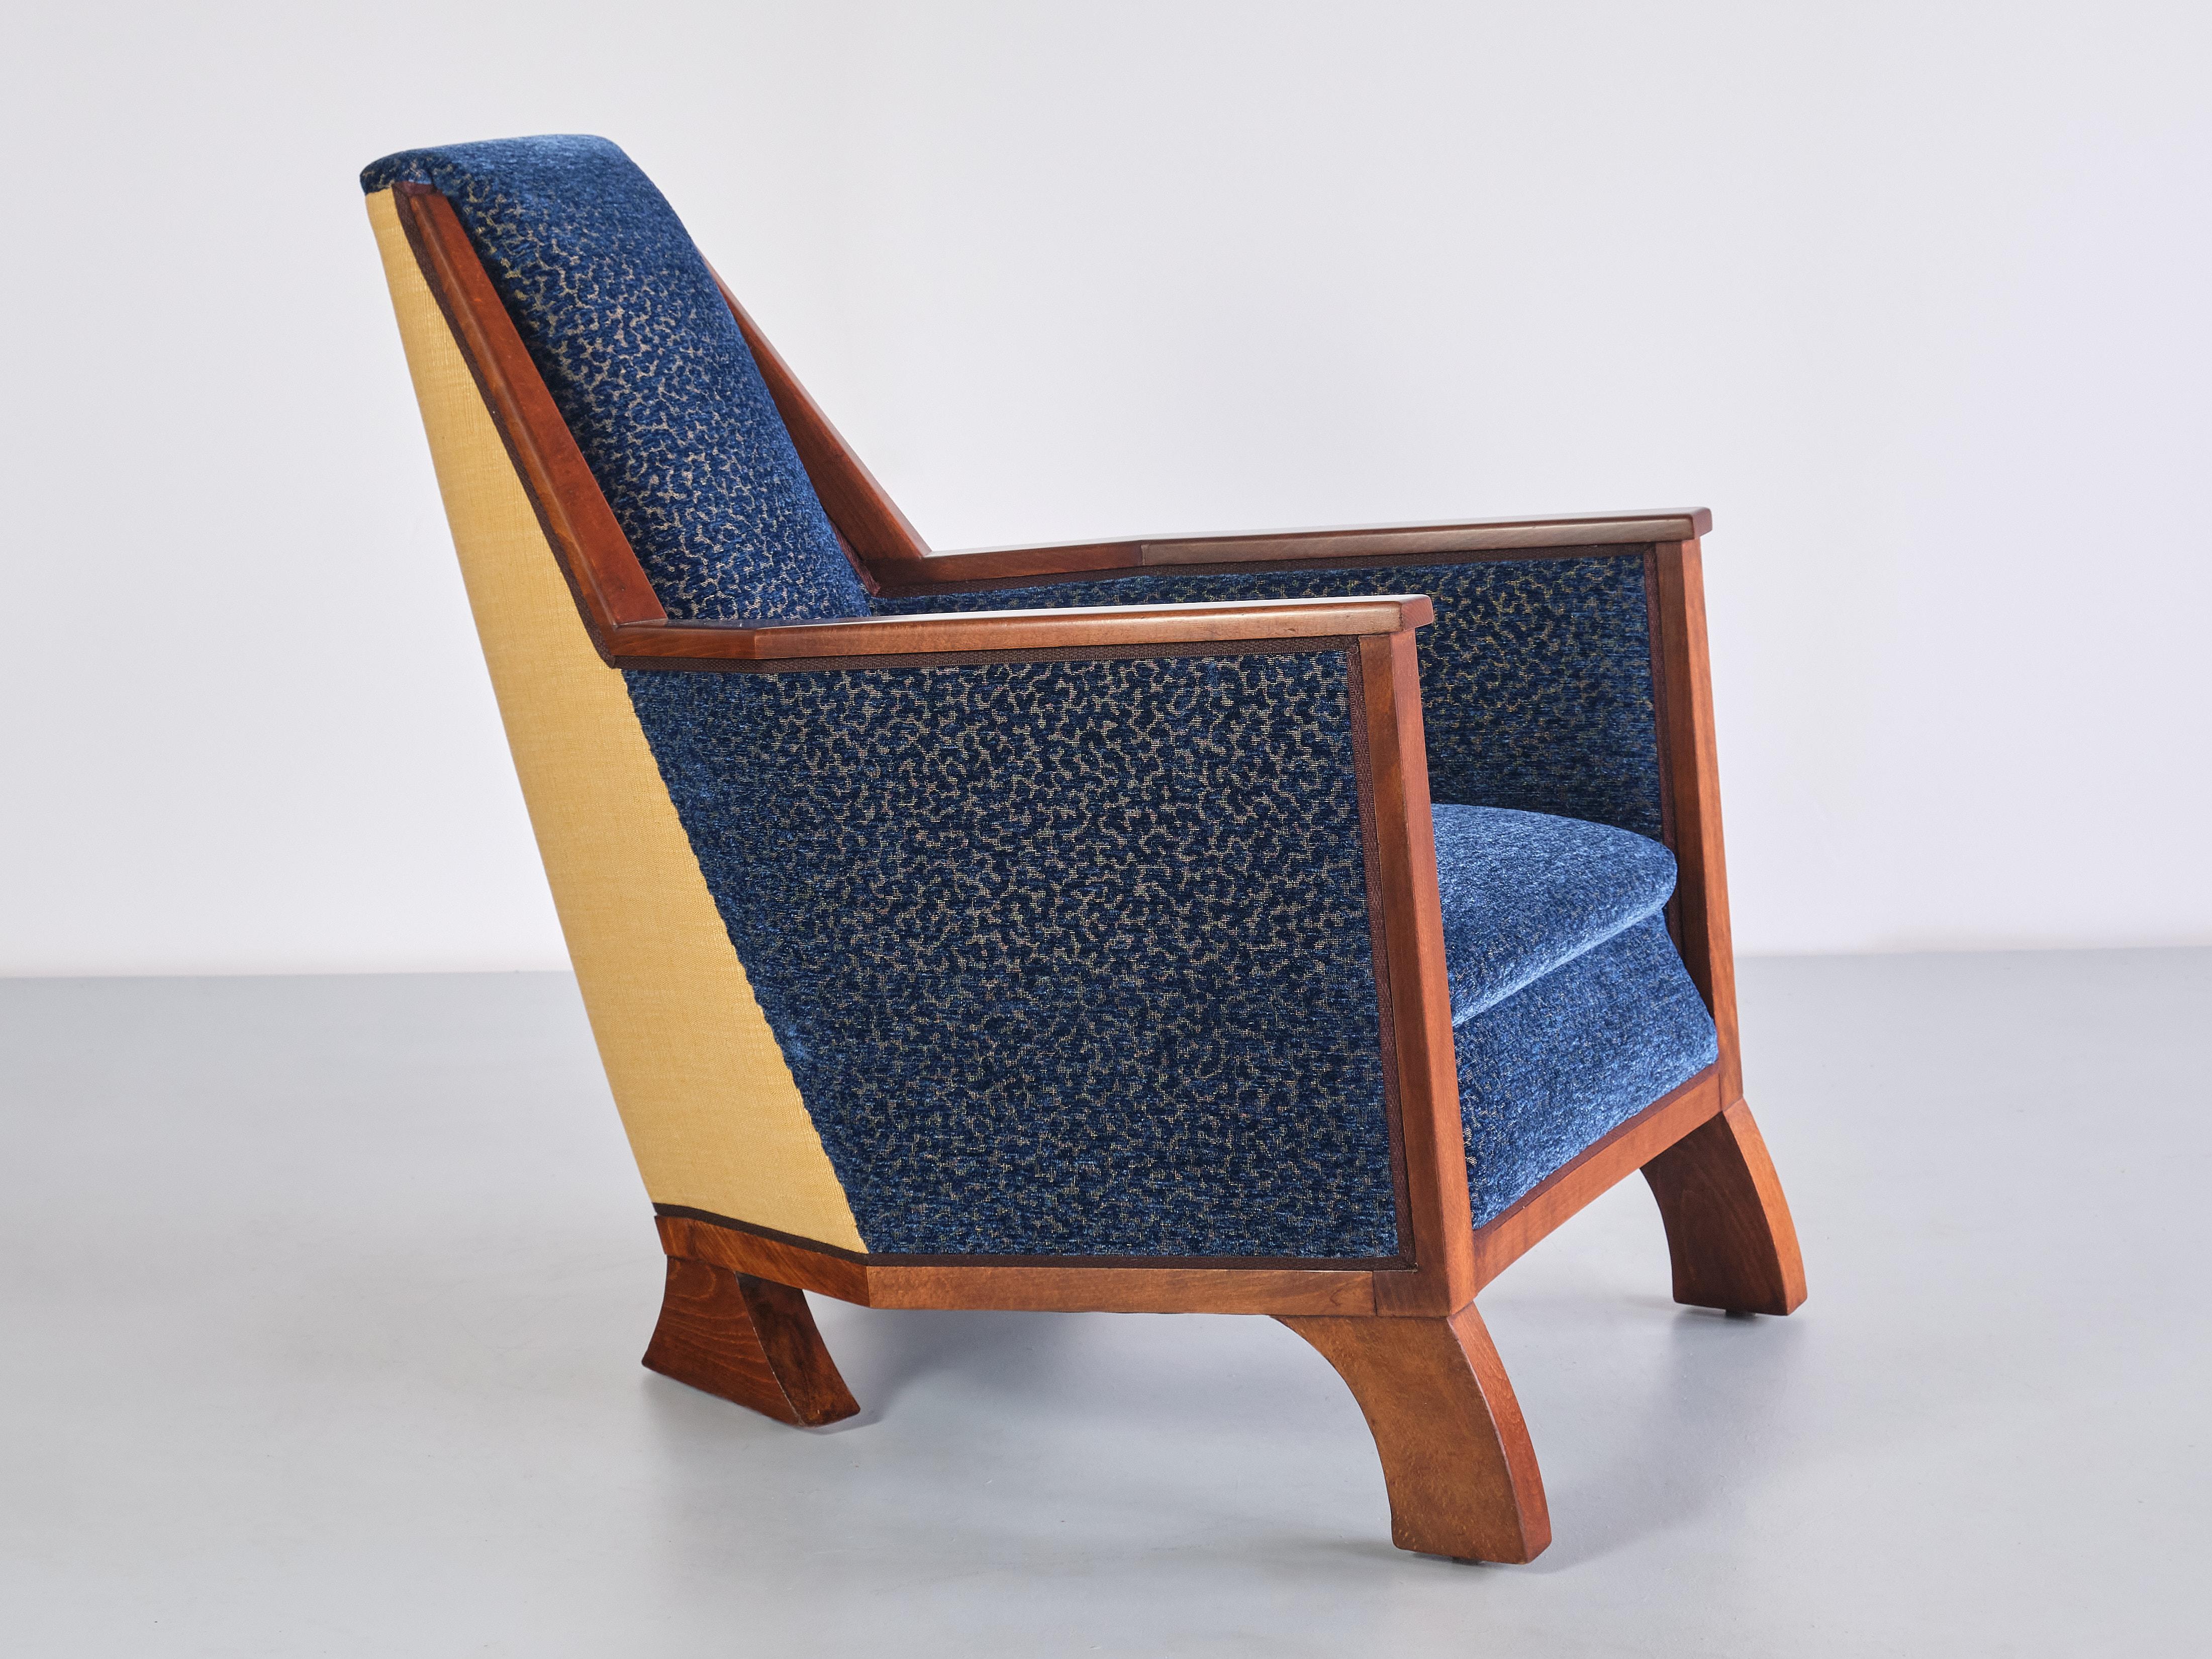 Exceptional Art Deco Arm Chair in Blue Velvet and Maple, Northern France, 1920s For Sale 11